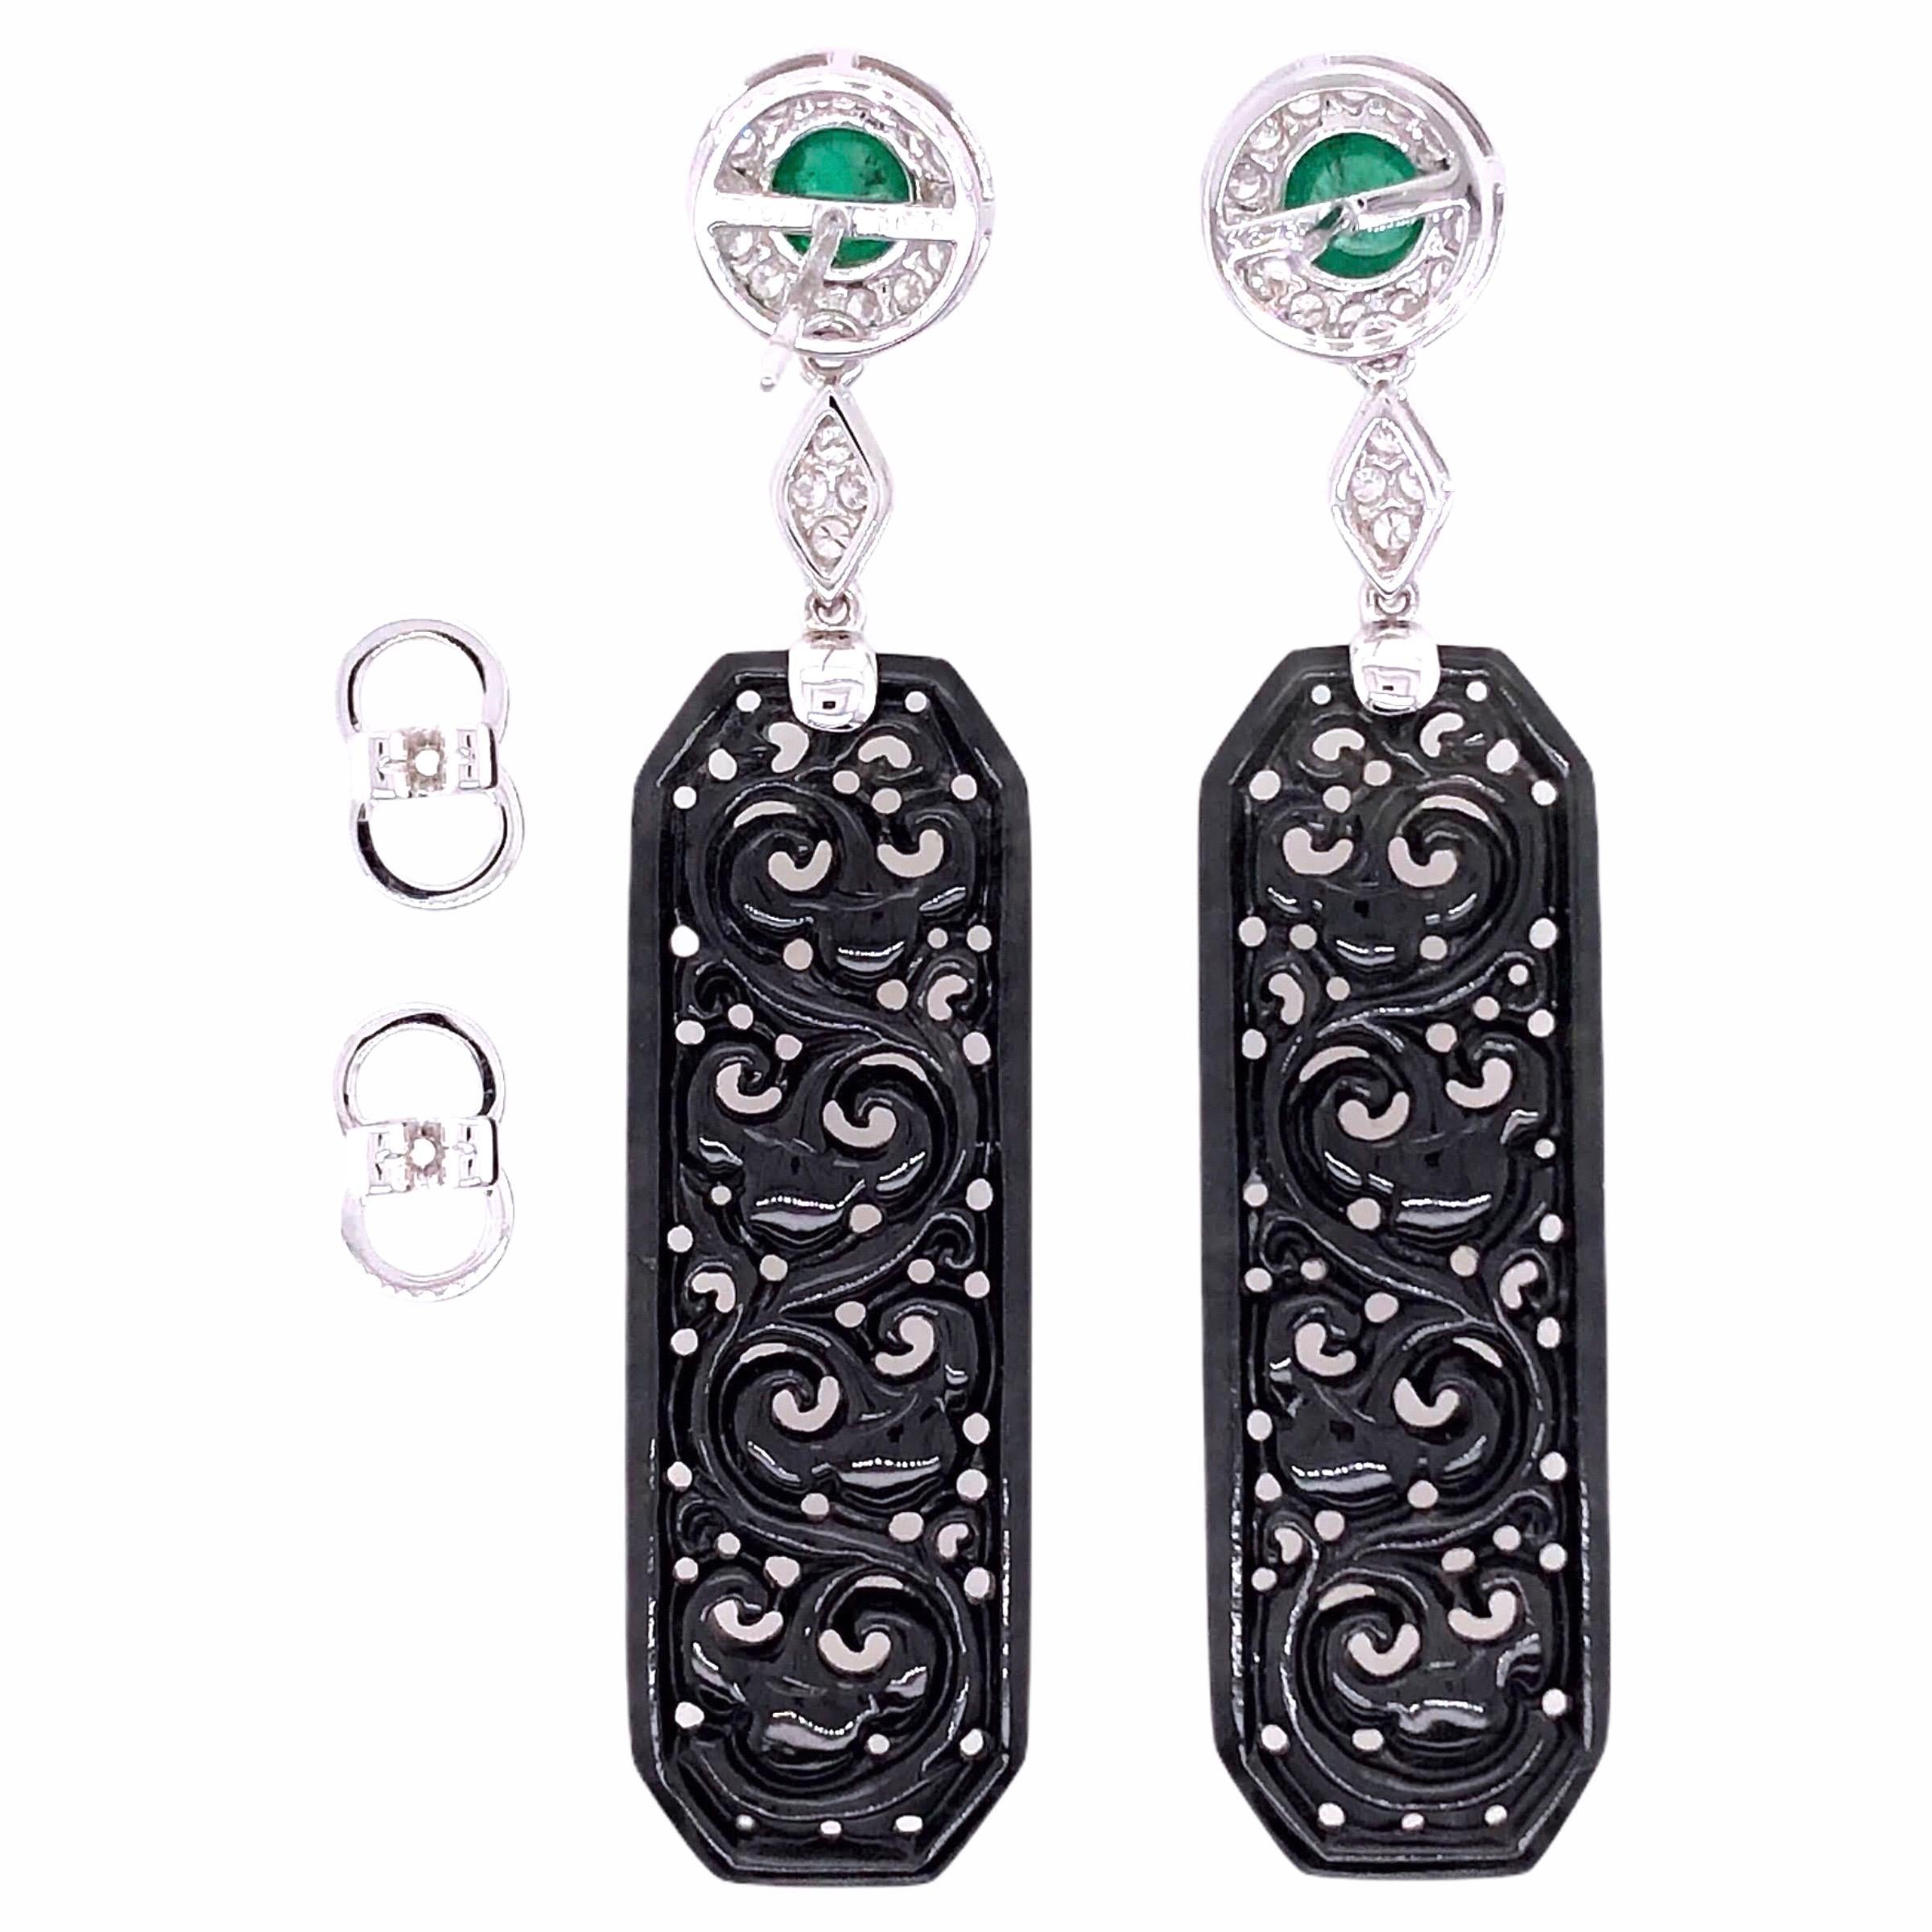 PARIS Craft House Onyx Emerald Diamond Earrings in 18 Karat White Gold.

- 2 Jadeite
- 2 Cabochon Emeralds/1.07ct
- 36 Round Diamonds/0.58ct
- 18K White Gold

Designed and crafted at PARIS Craft House.